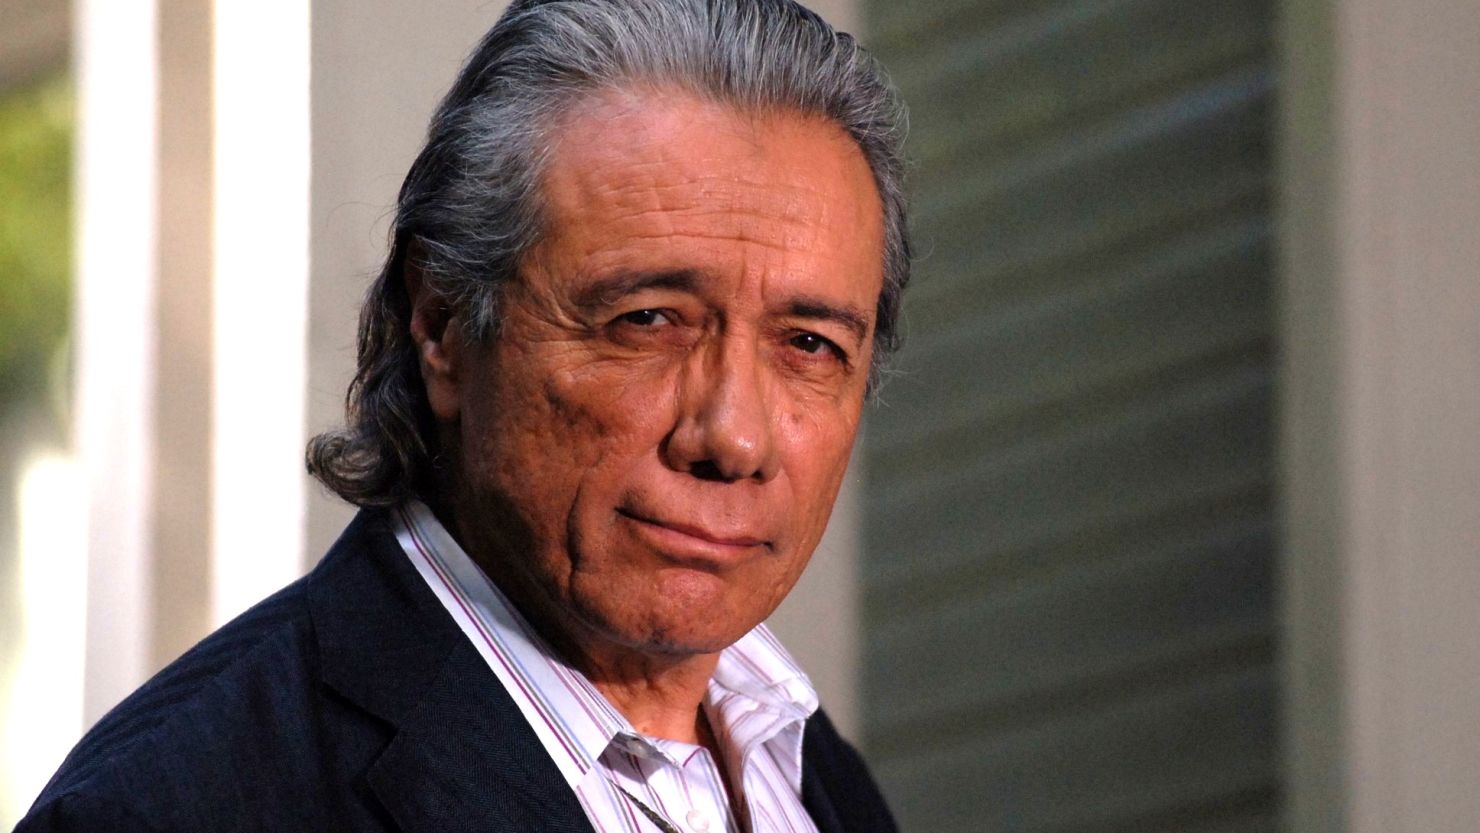 Edward James Olmos in "Filly Brown" coming out in theatres on April 19th